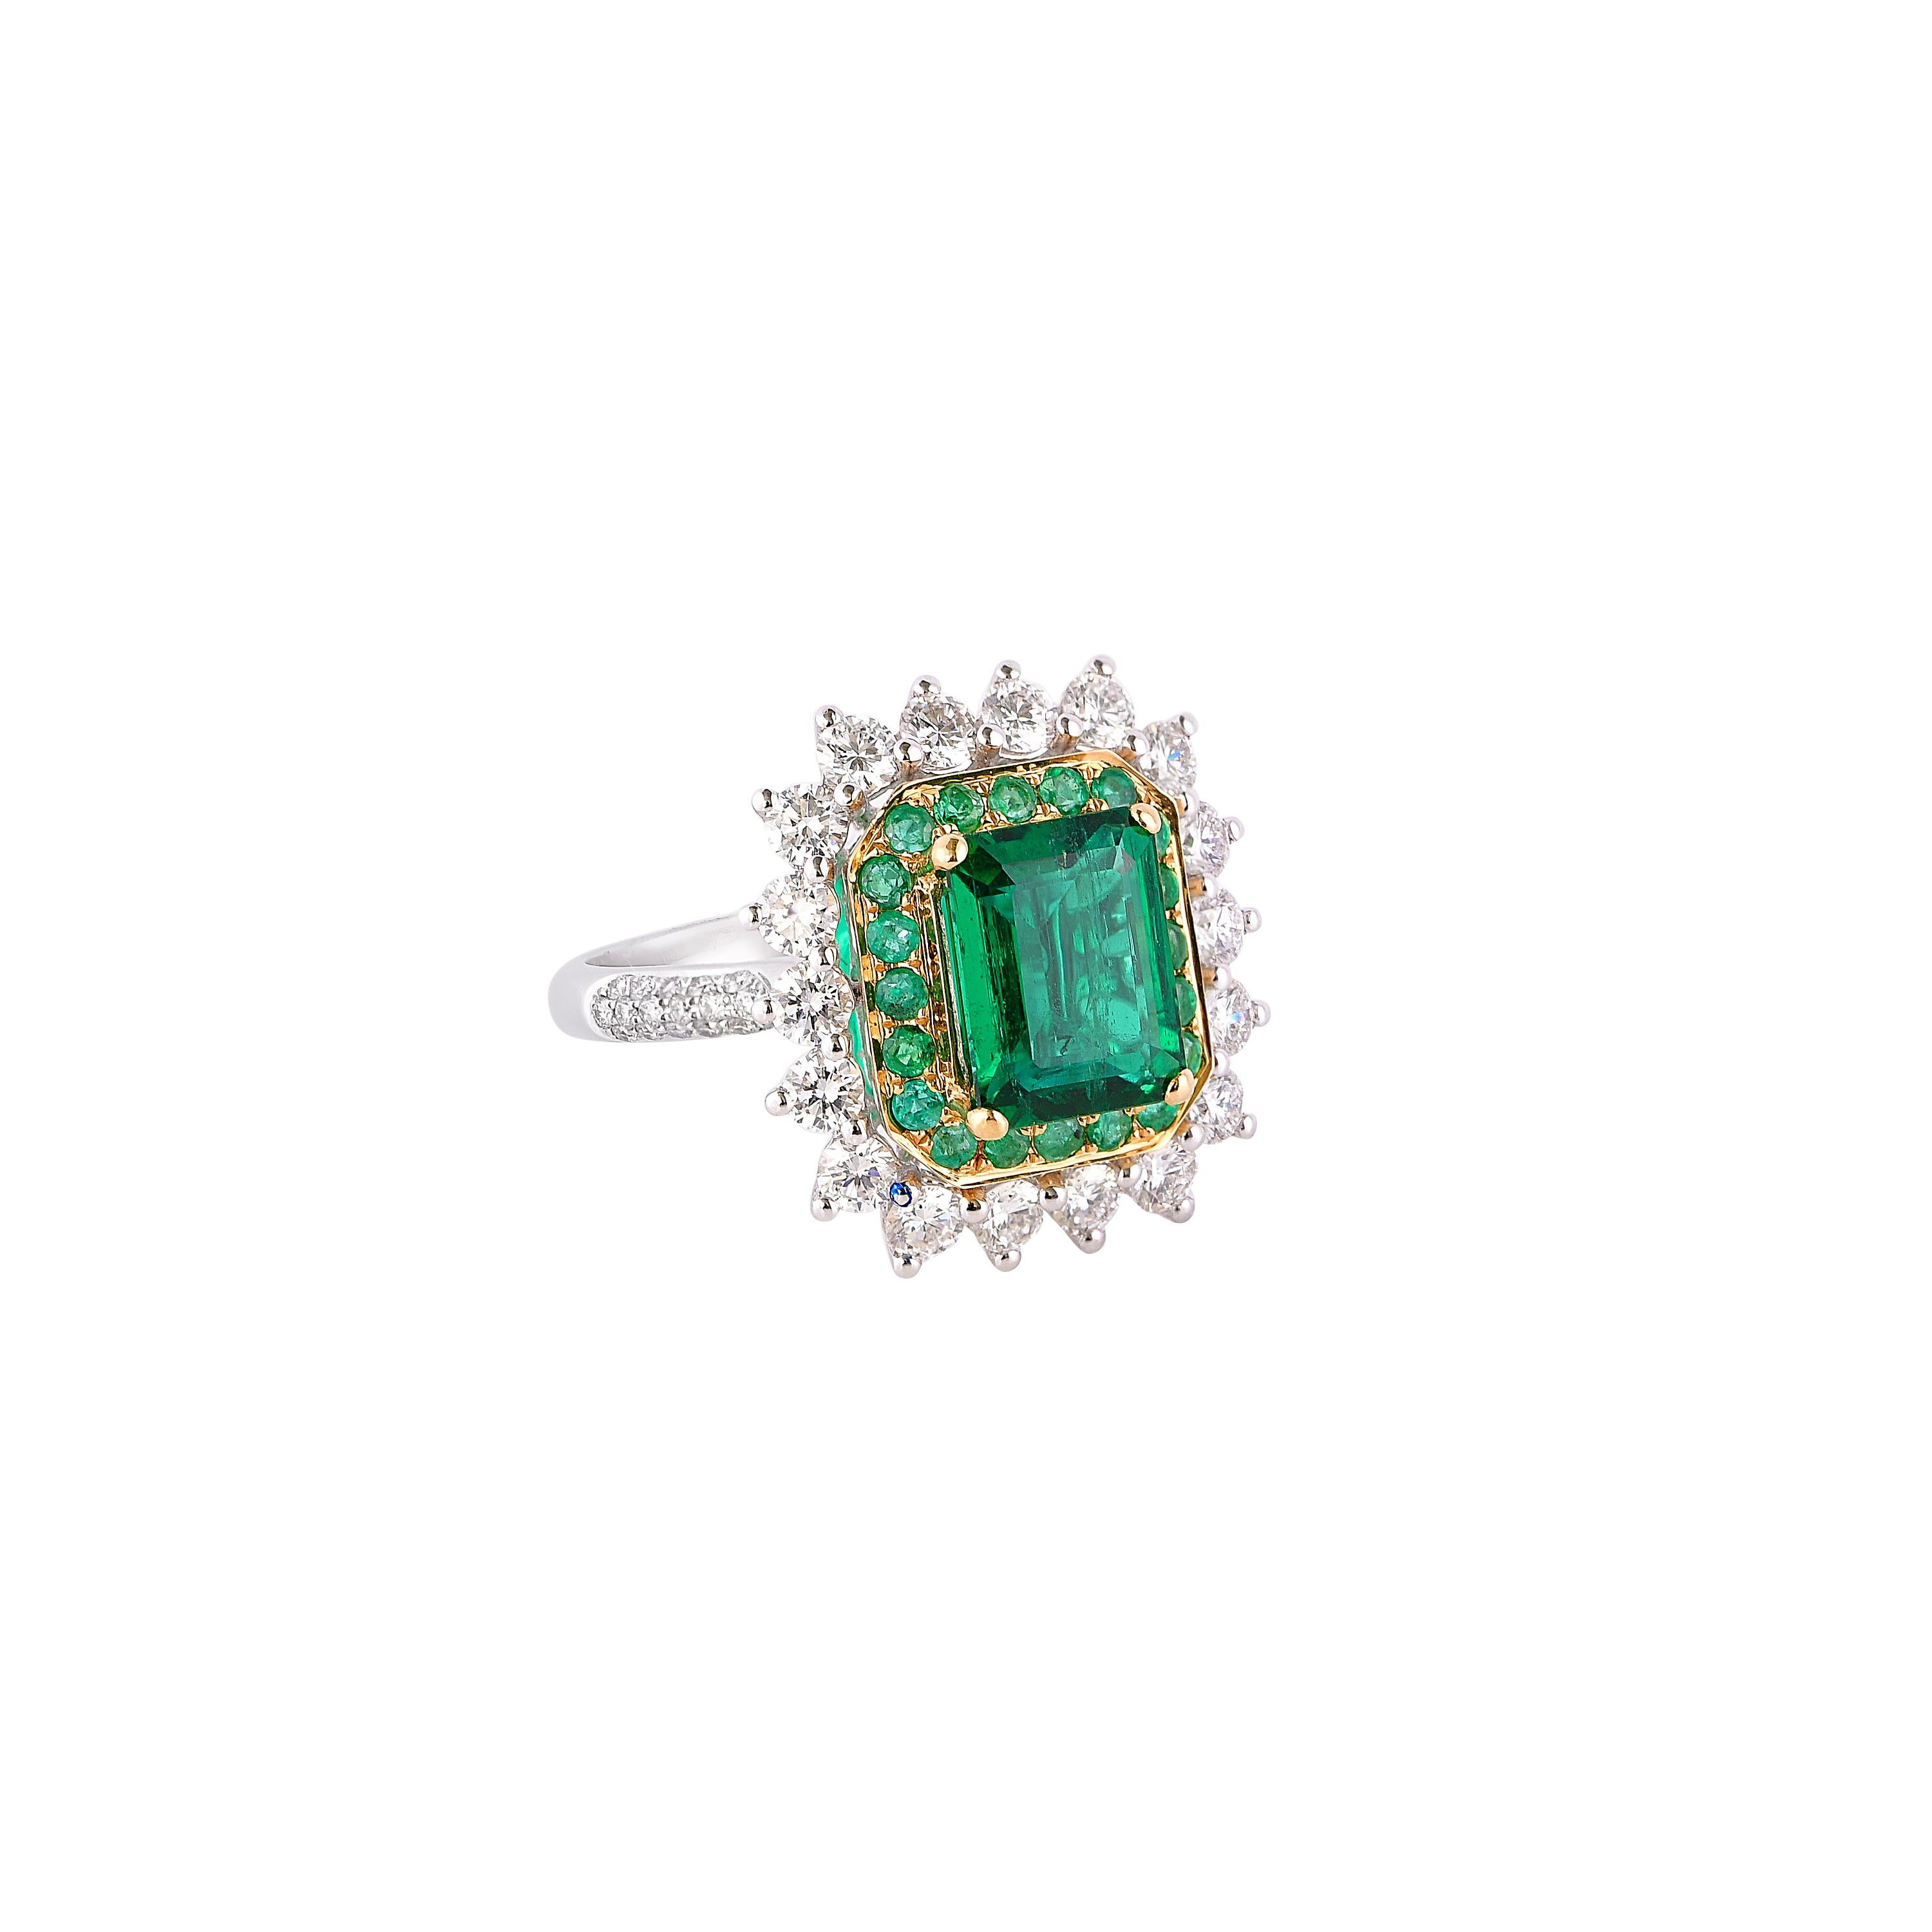 Showcasing the most vibrant Colombian and Zambian emeralds and diamonds, Sunita Nahata dedicates this collection to her home city of Jaipur where the jewelry industry dates back to the early 1700s. Jaipur is also an epicenter for the global emerald